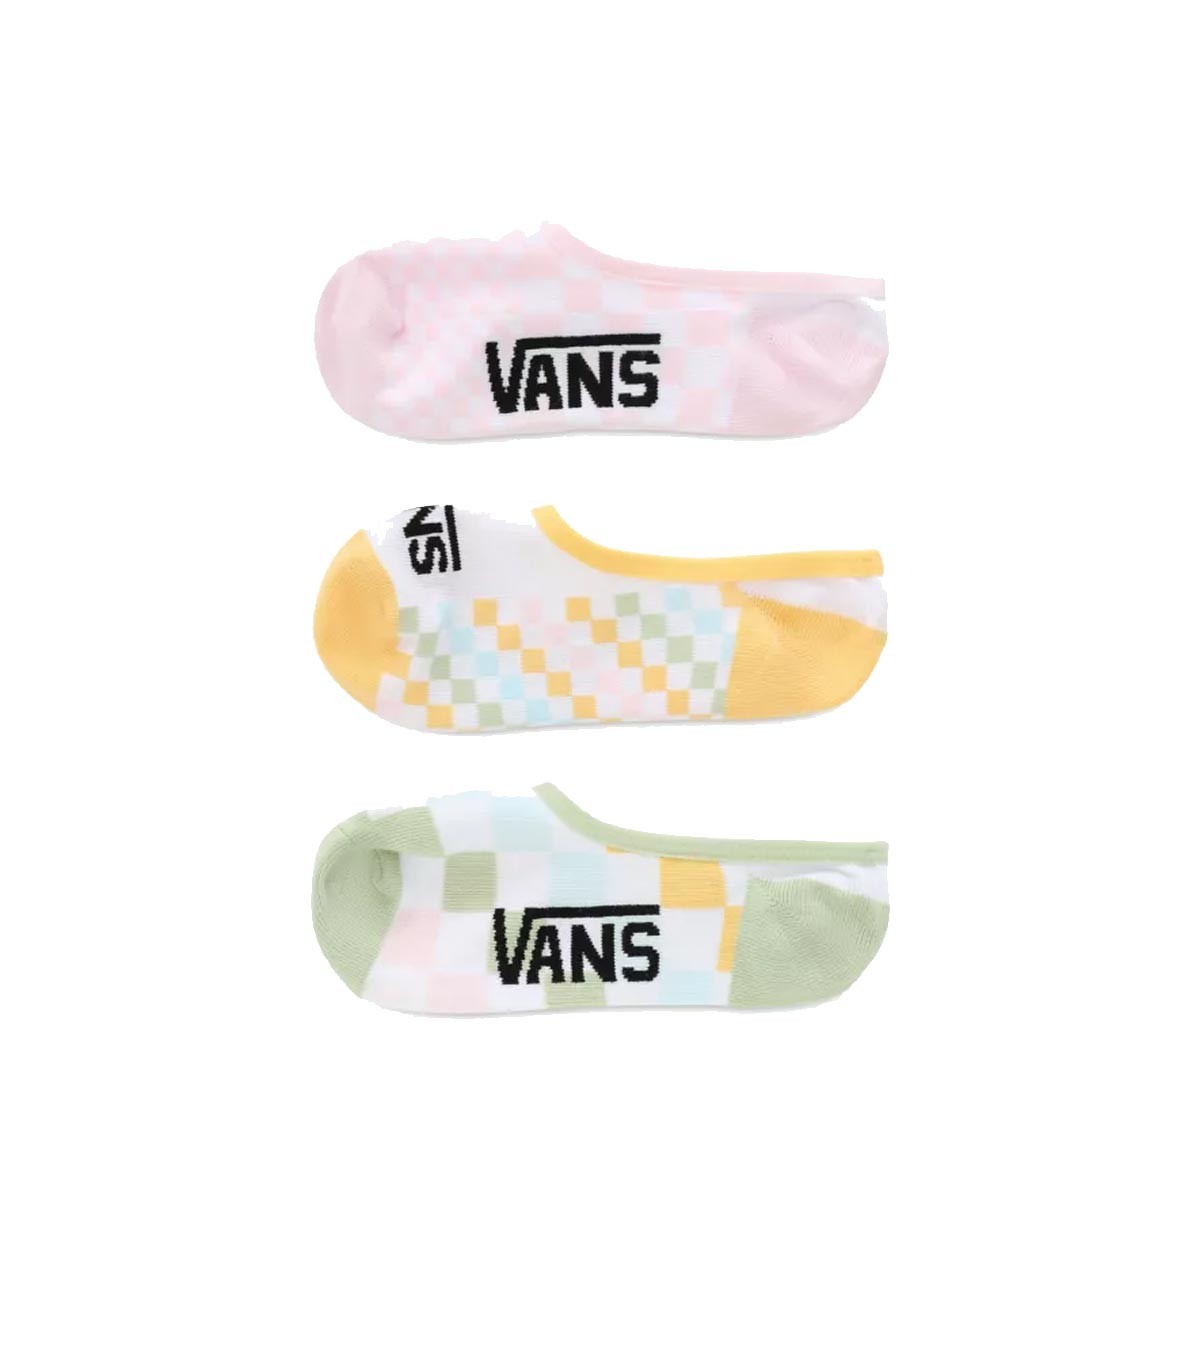 Vans - Calcetines Classic Check Canoodle 6 - Multicolor